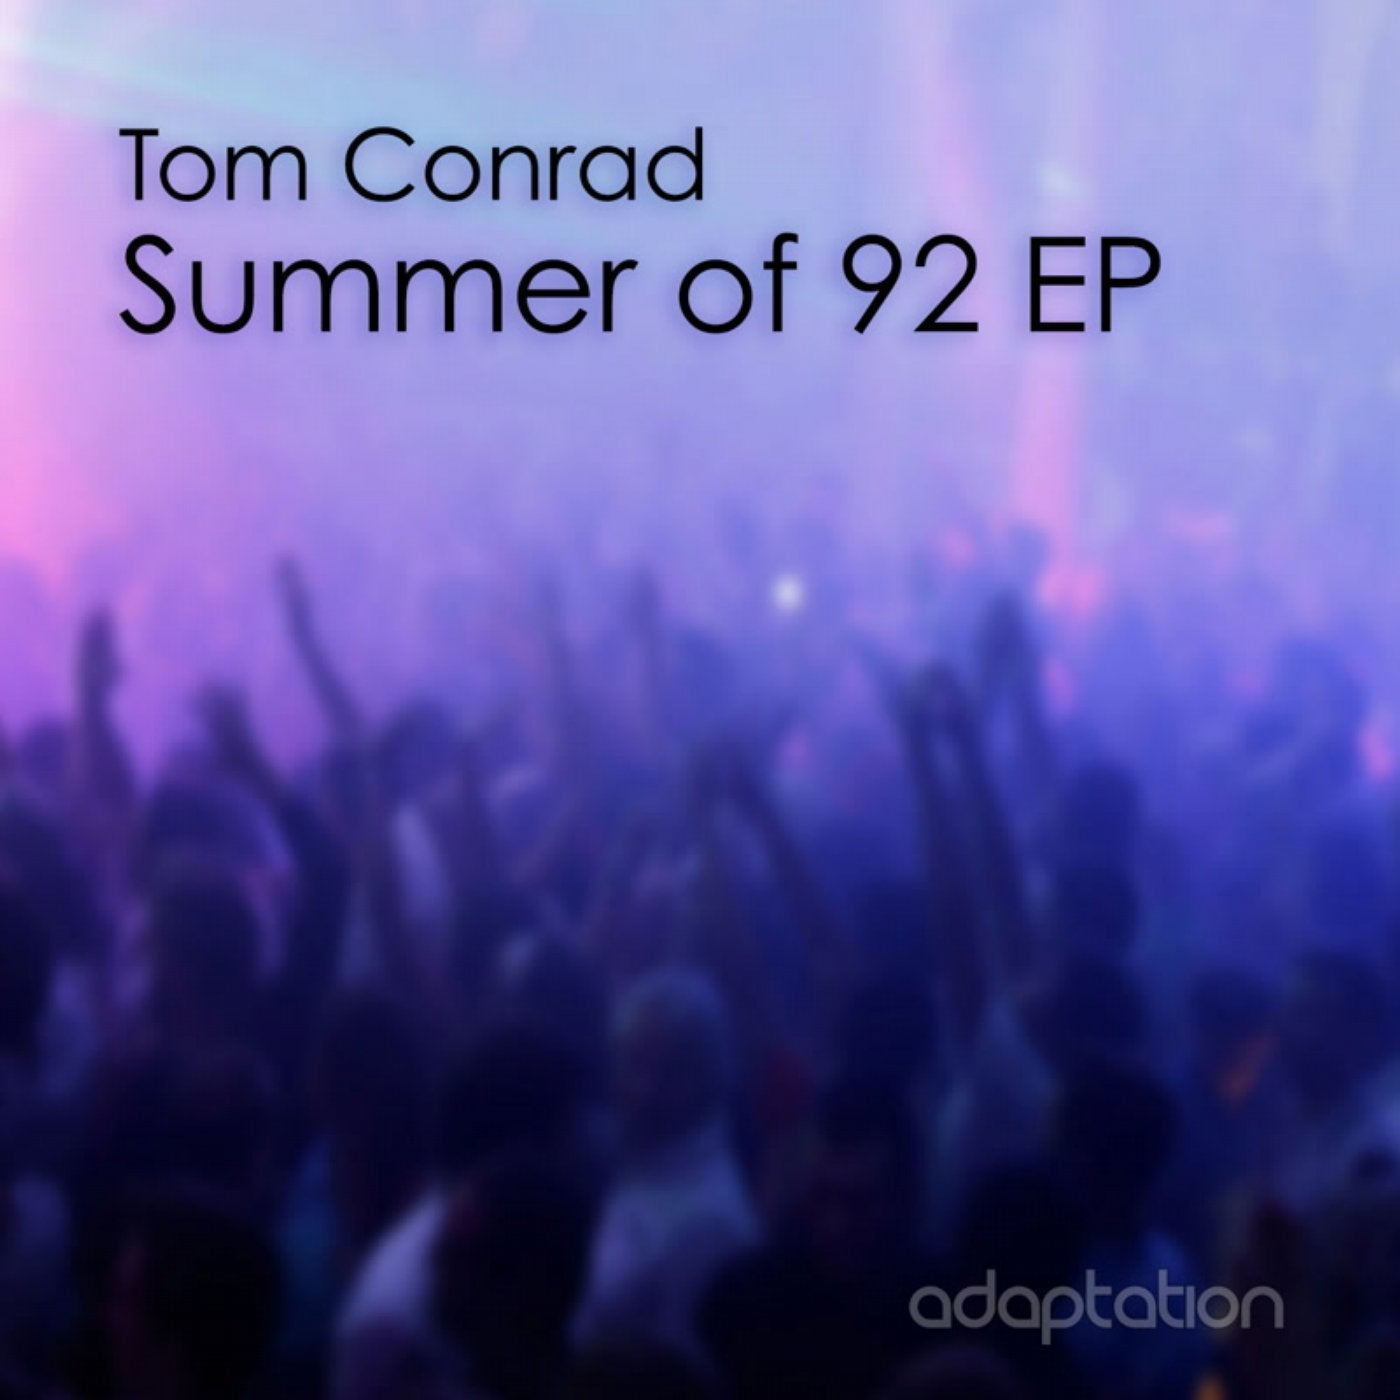 Summer of 92 EP